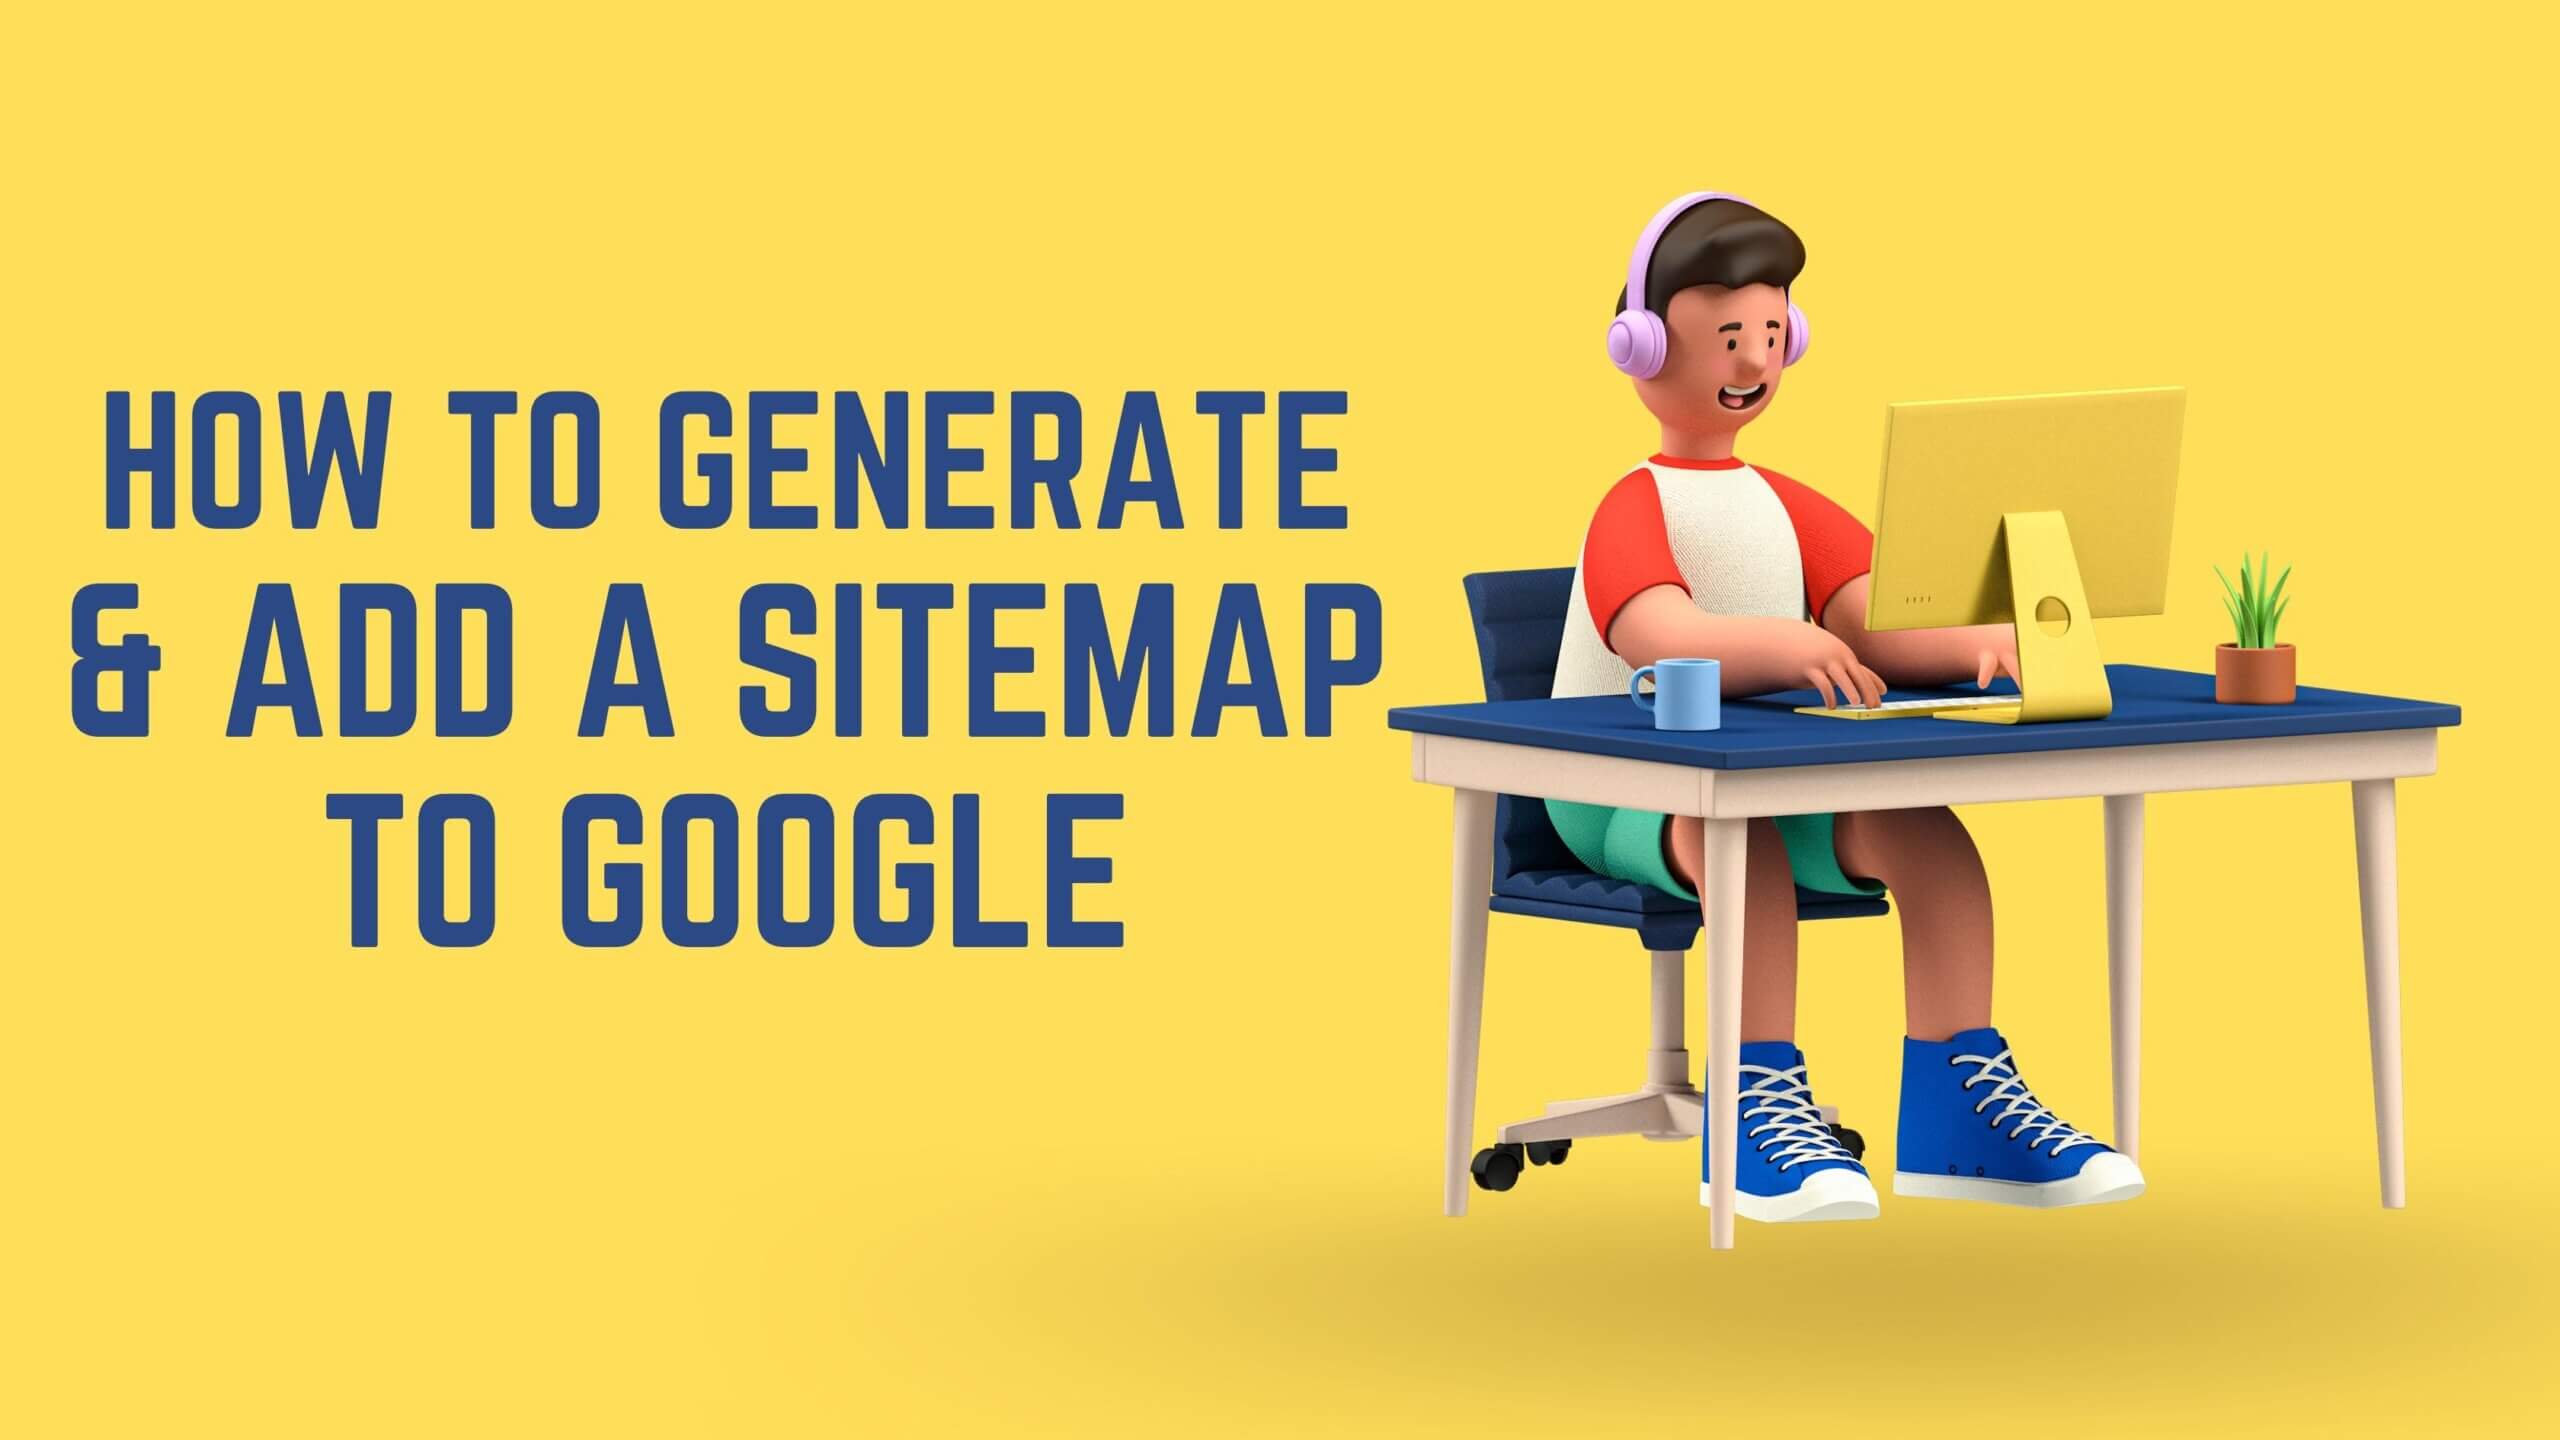 What is a sitemap?